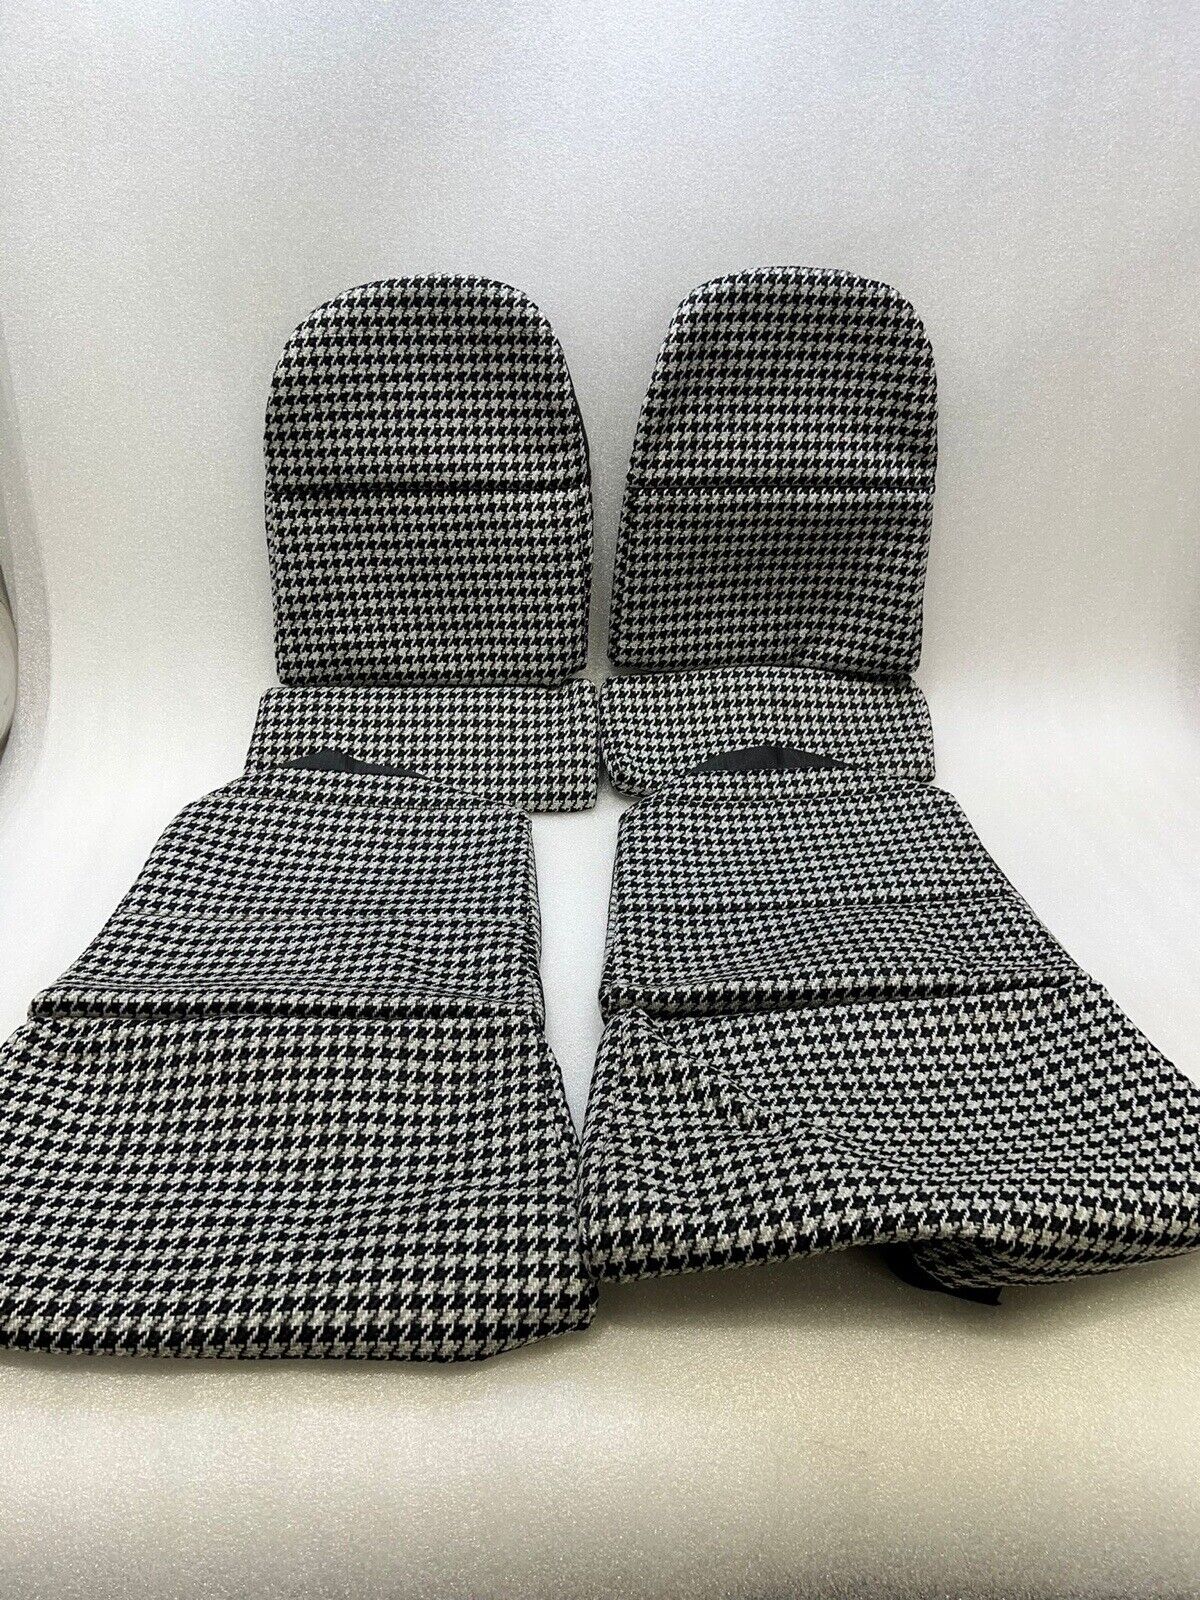 PORSCHE 911 997 GT3RS FOLDING CARBON BUCKET SEAT COVER SET GT3 HOUNDSTOOTH CLOTH